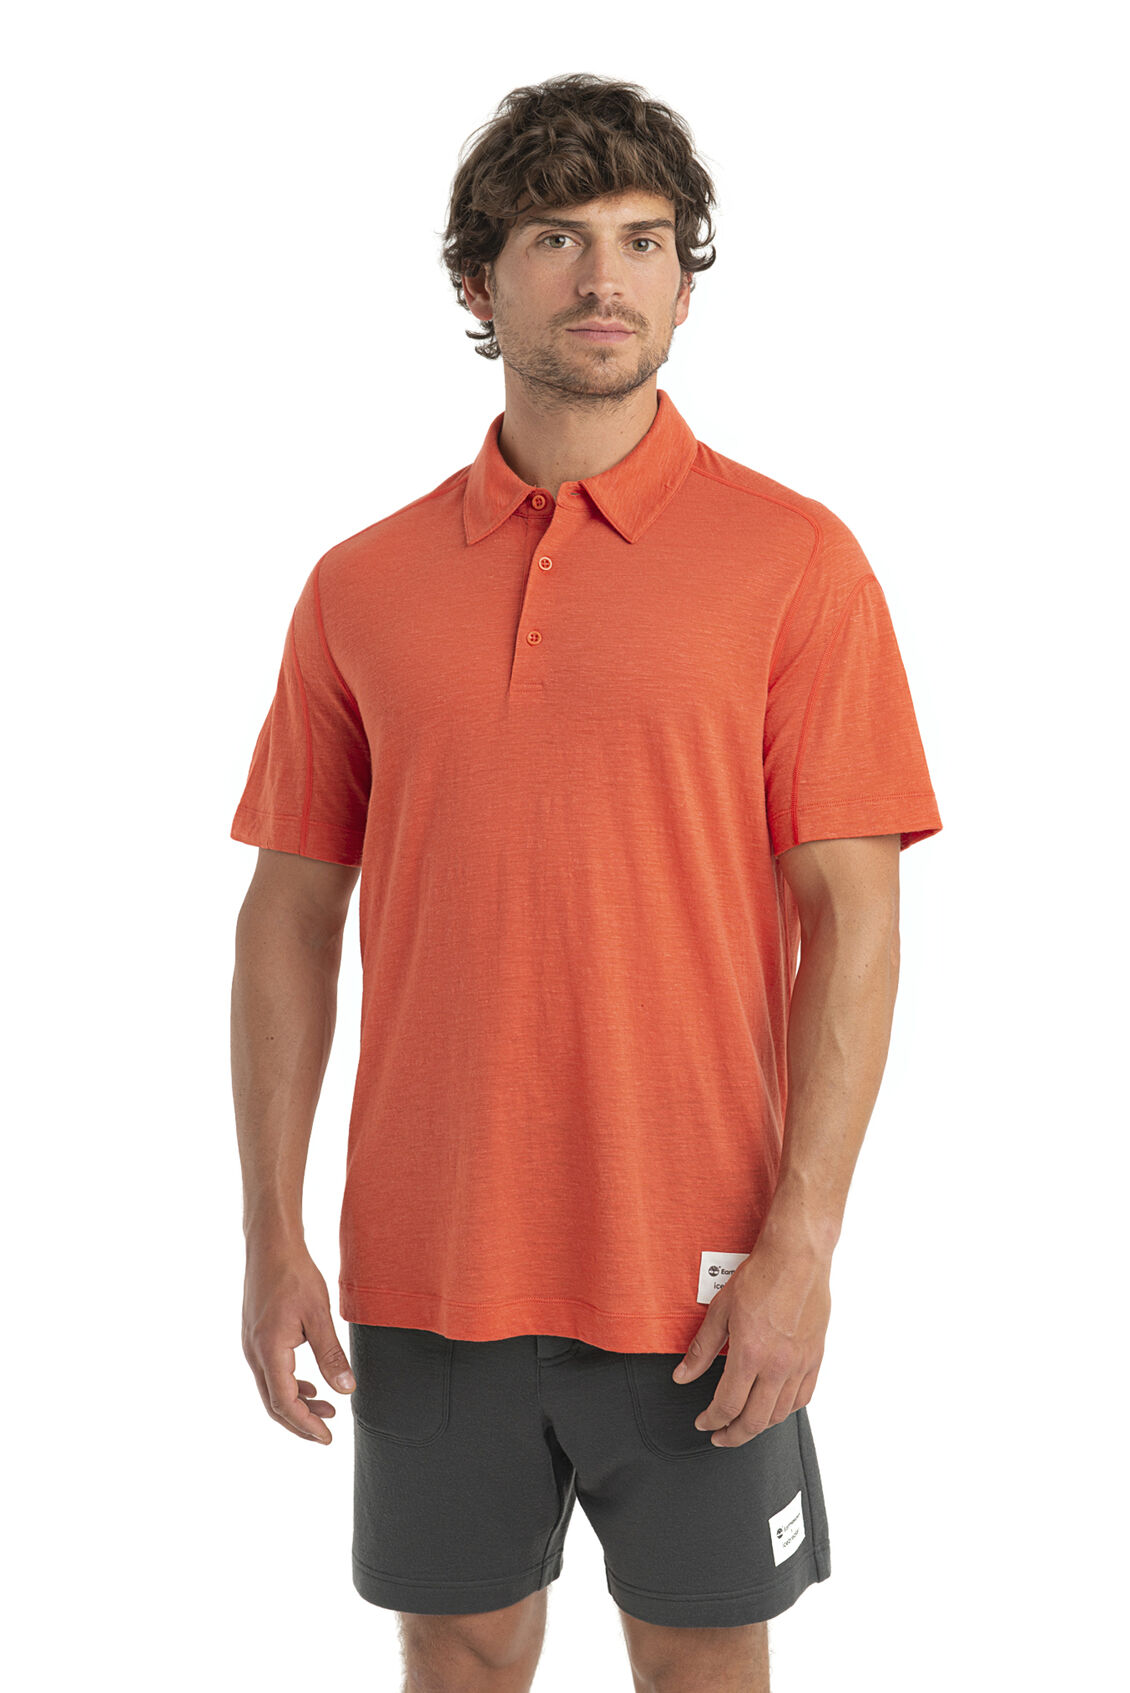 Mens Timberland x icebreaker Merino Linen Short Sleeve Polo Designed in collaboration with Timberland, the Timberland x icebreaker Merino Linen Short Sleeve Polo features a soft, comfortable merino-linen blend and clean, classic polo style. 